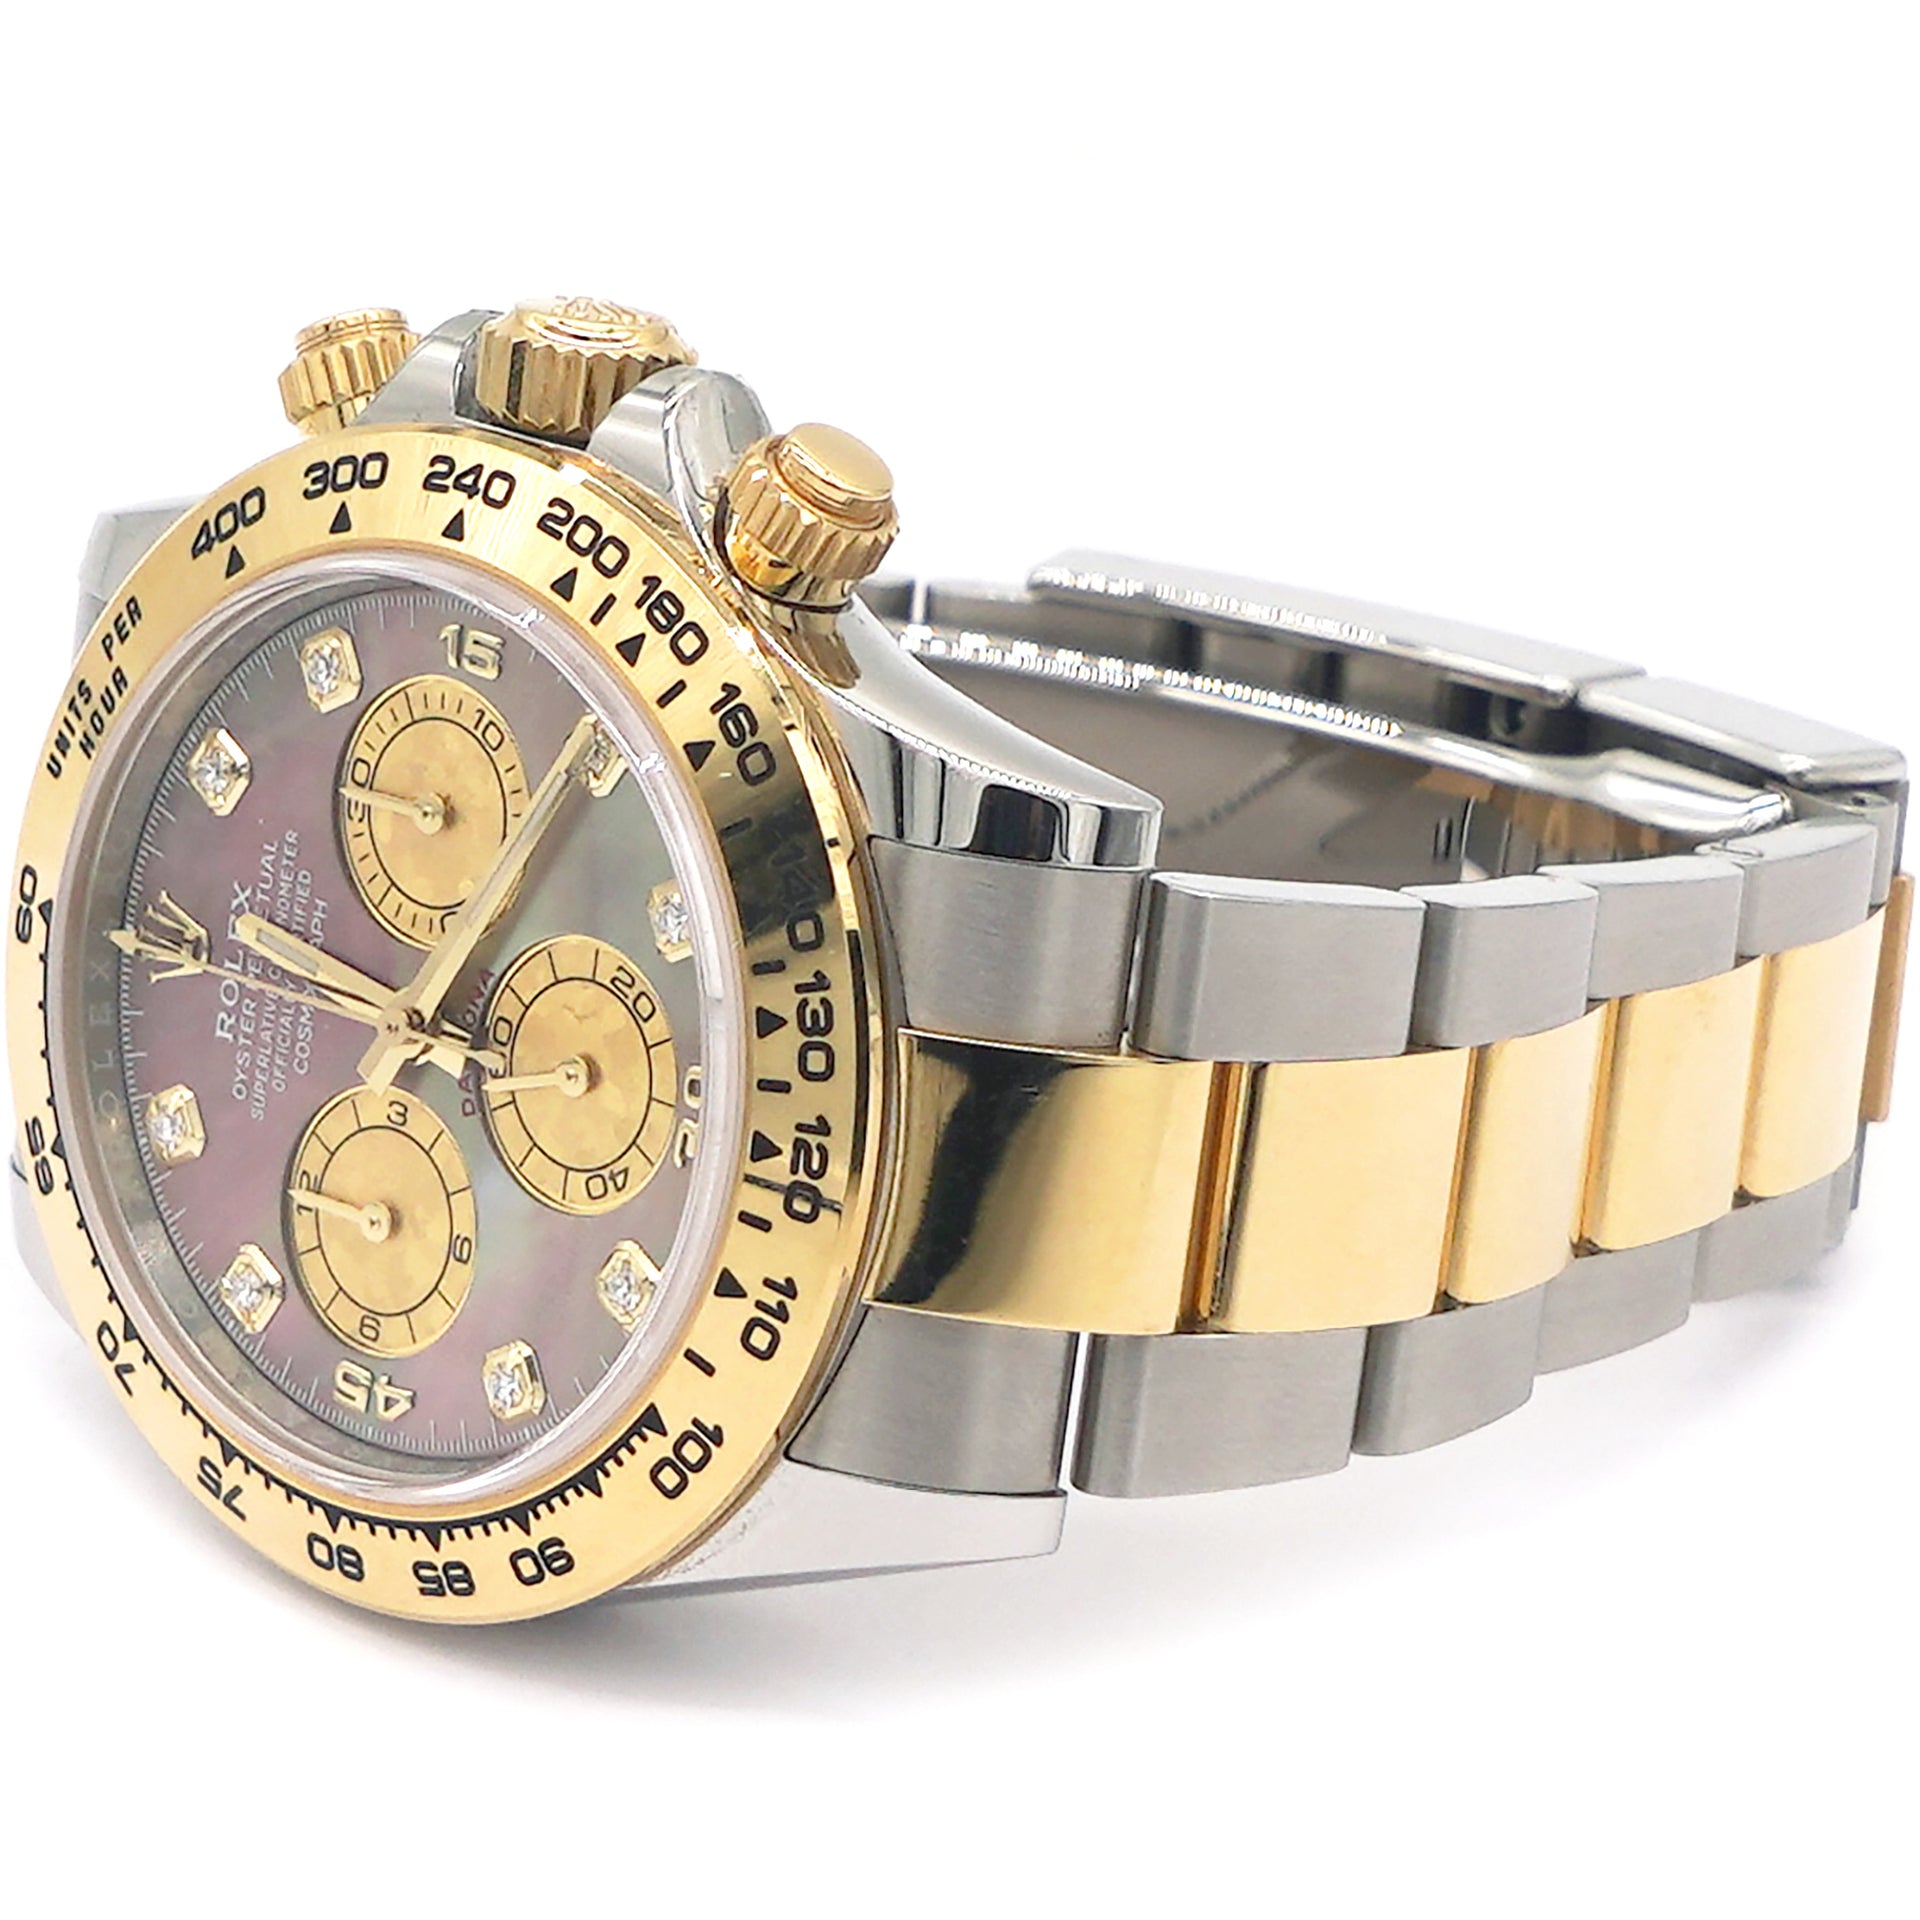 Cosmograph Daytona Oystersteel and Yellow Gold 40mm M116503